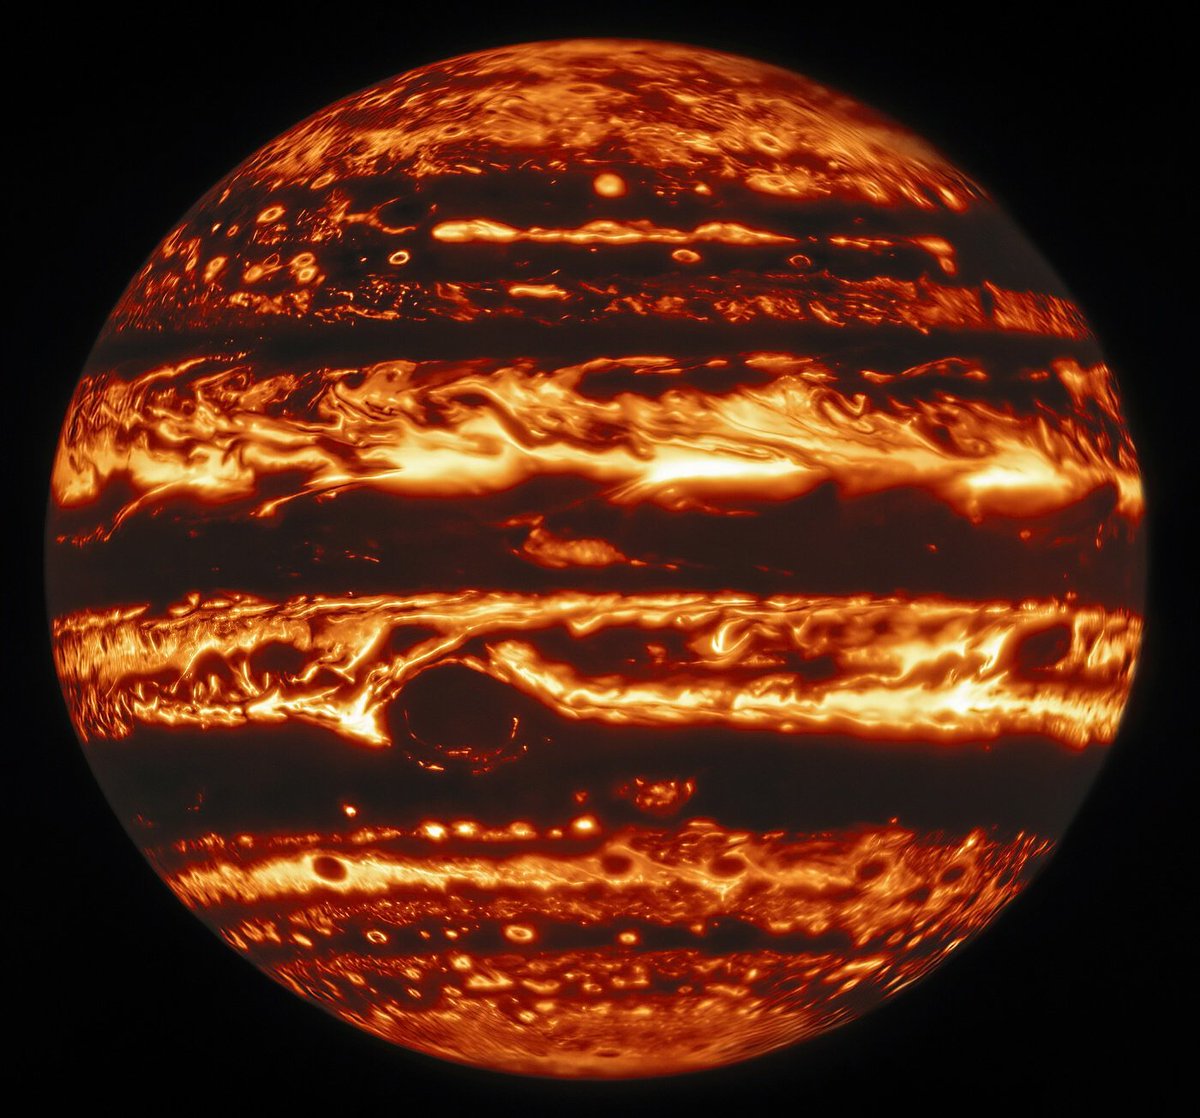 An image of Jupiter from the 8.1-meter Gemini telescope in Hawaii 🔭